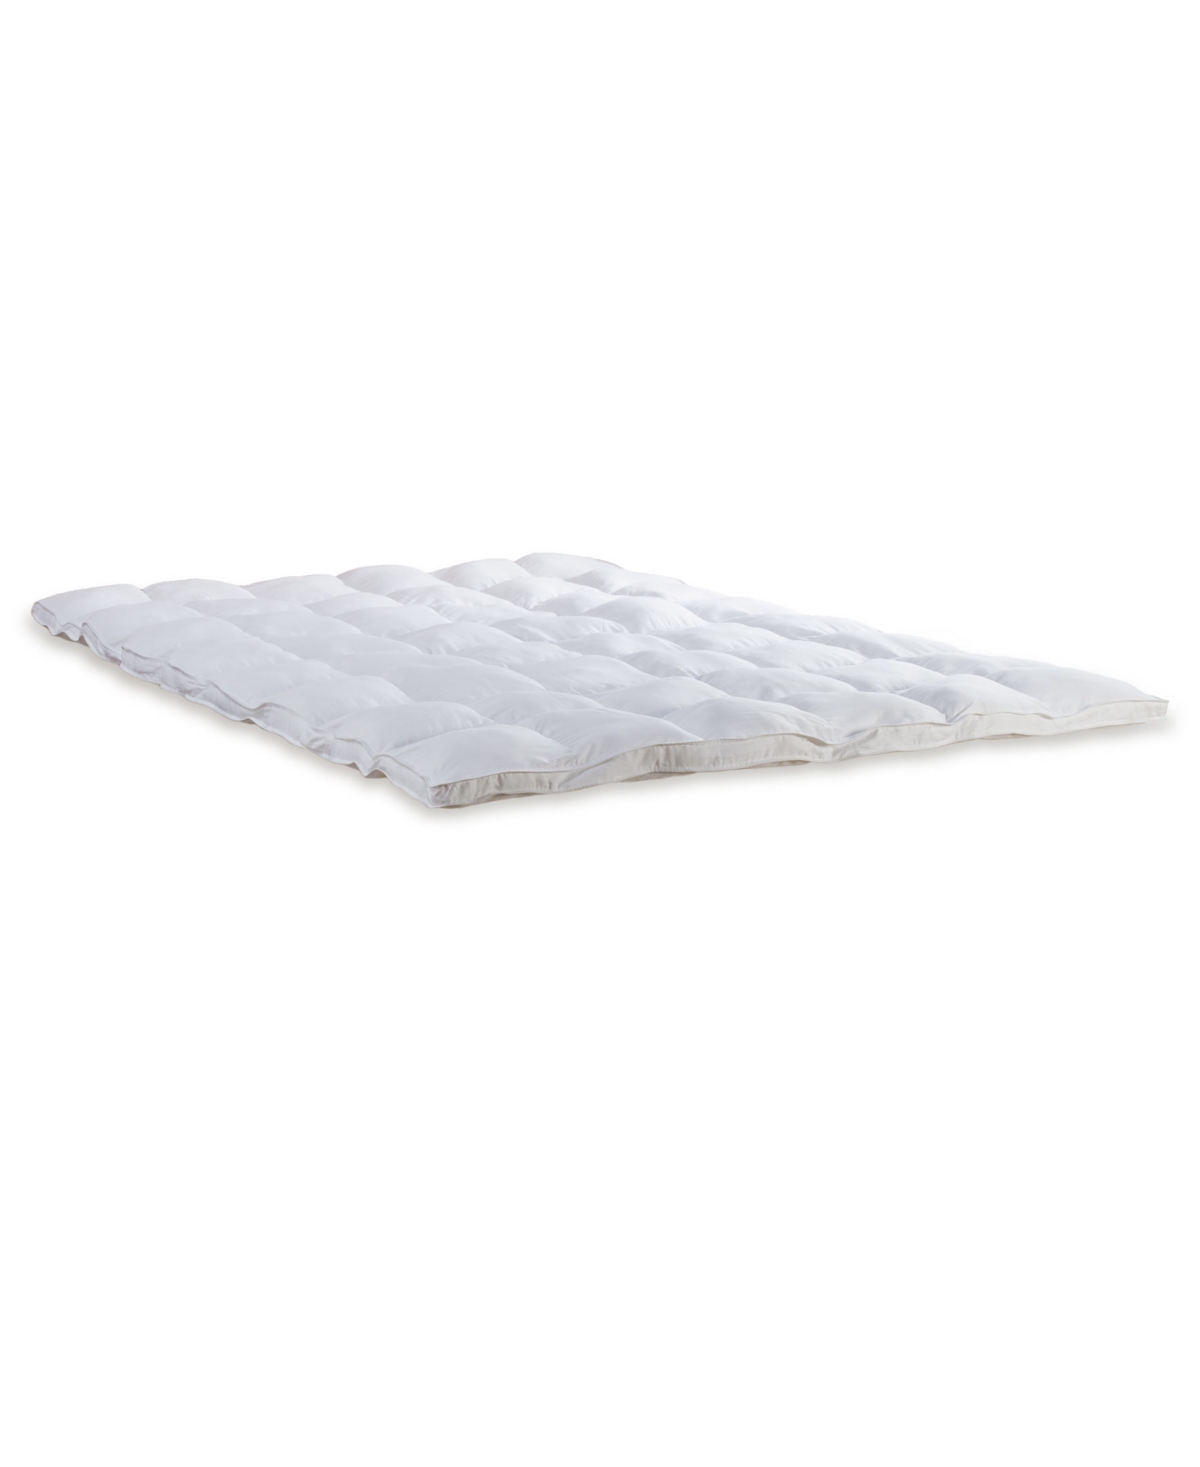 Beyond Down Fiberbed, King In White